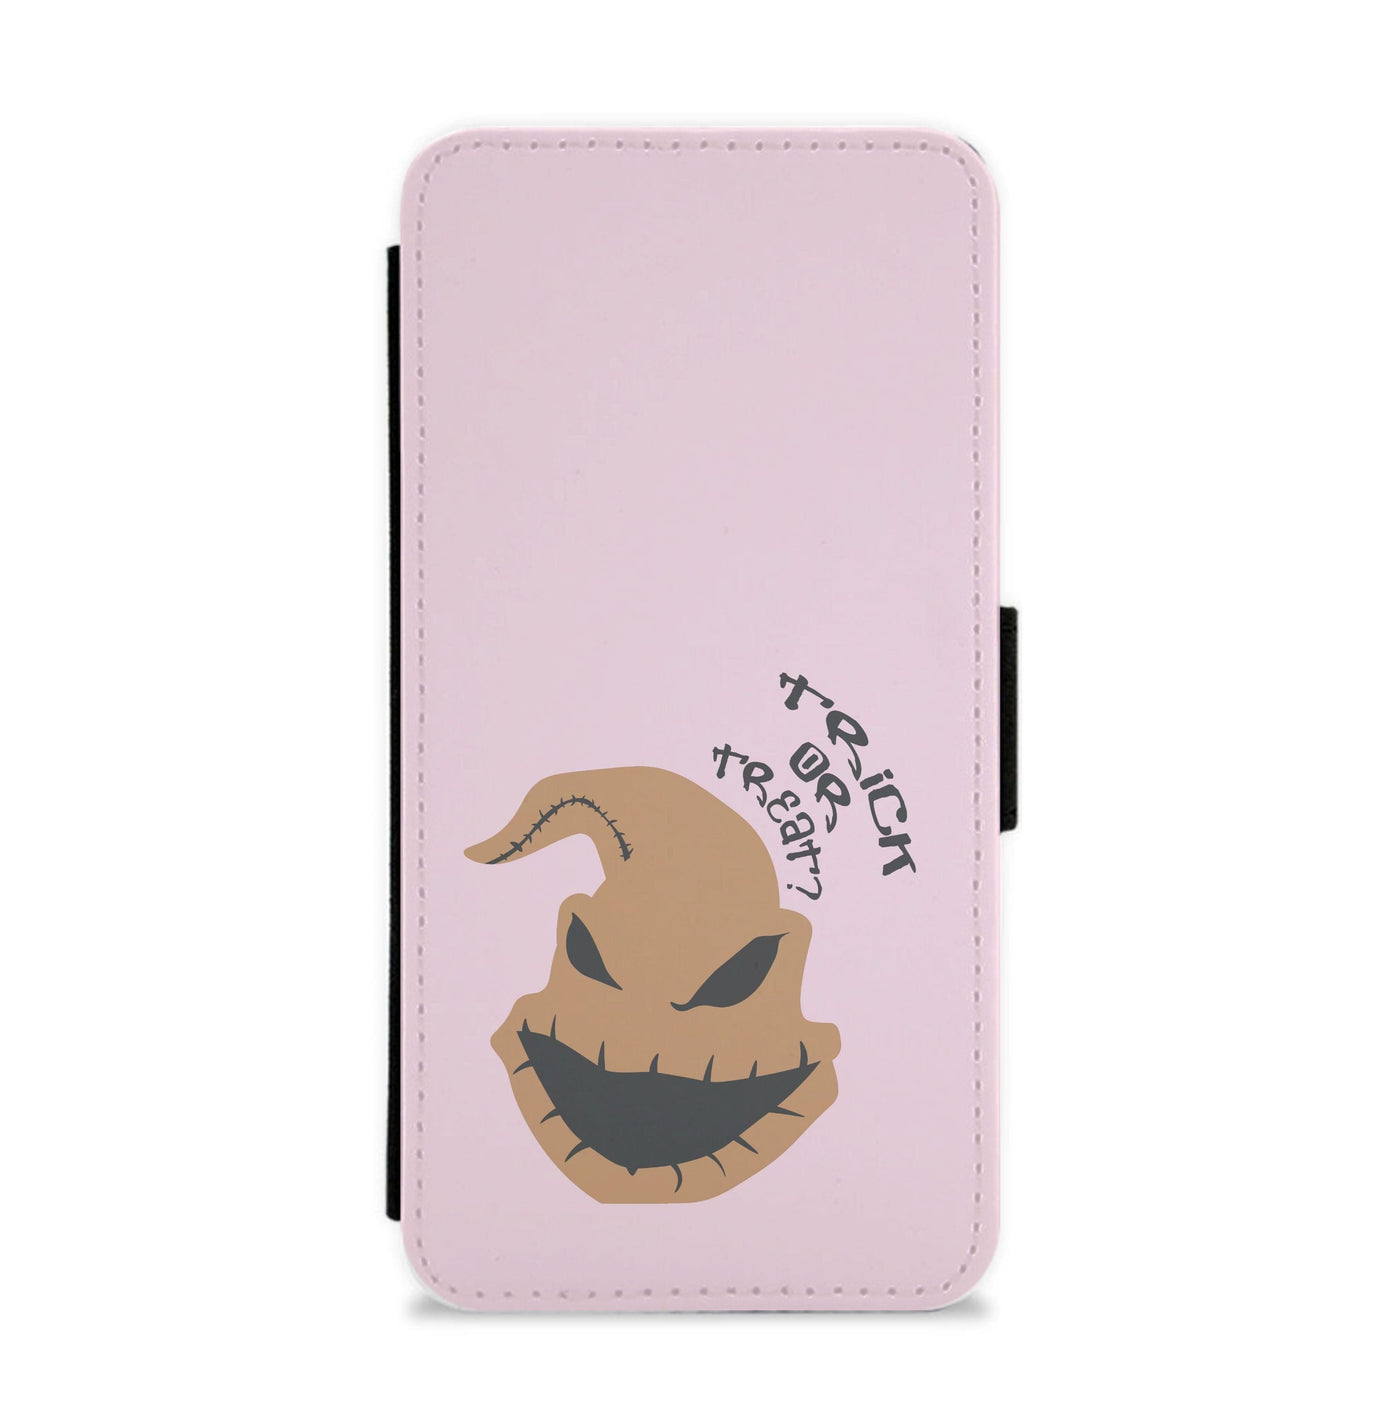 Trick Or Treat? - The Nightmare Before Christmas Flip / Wallet Phone Case